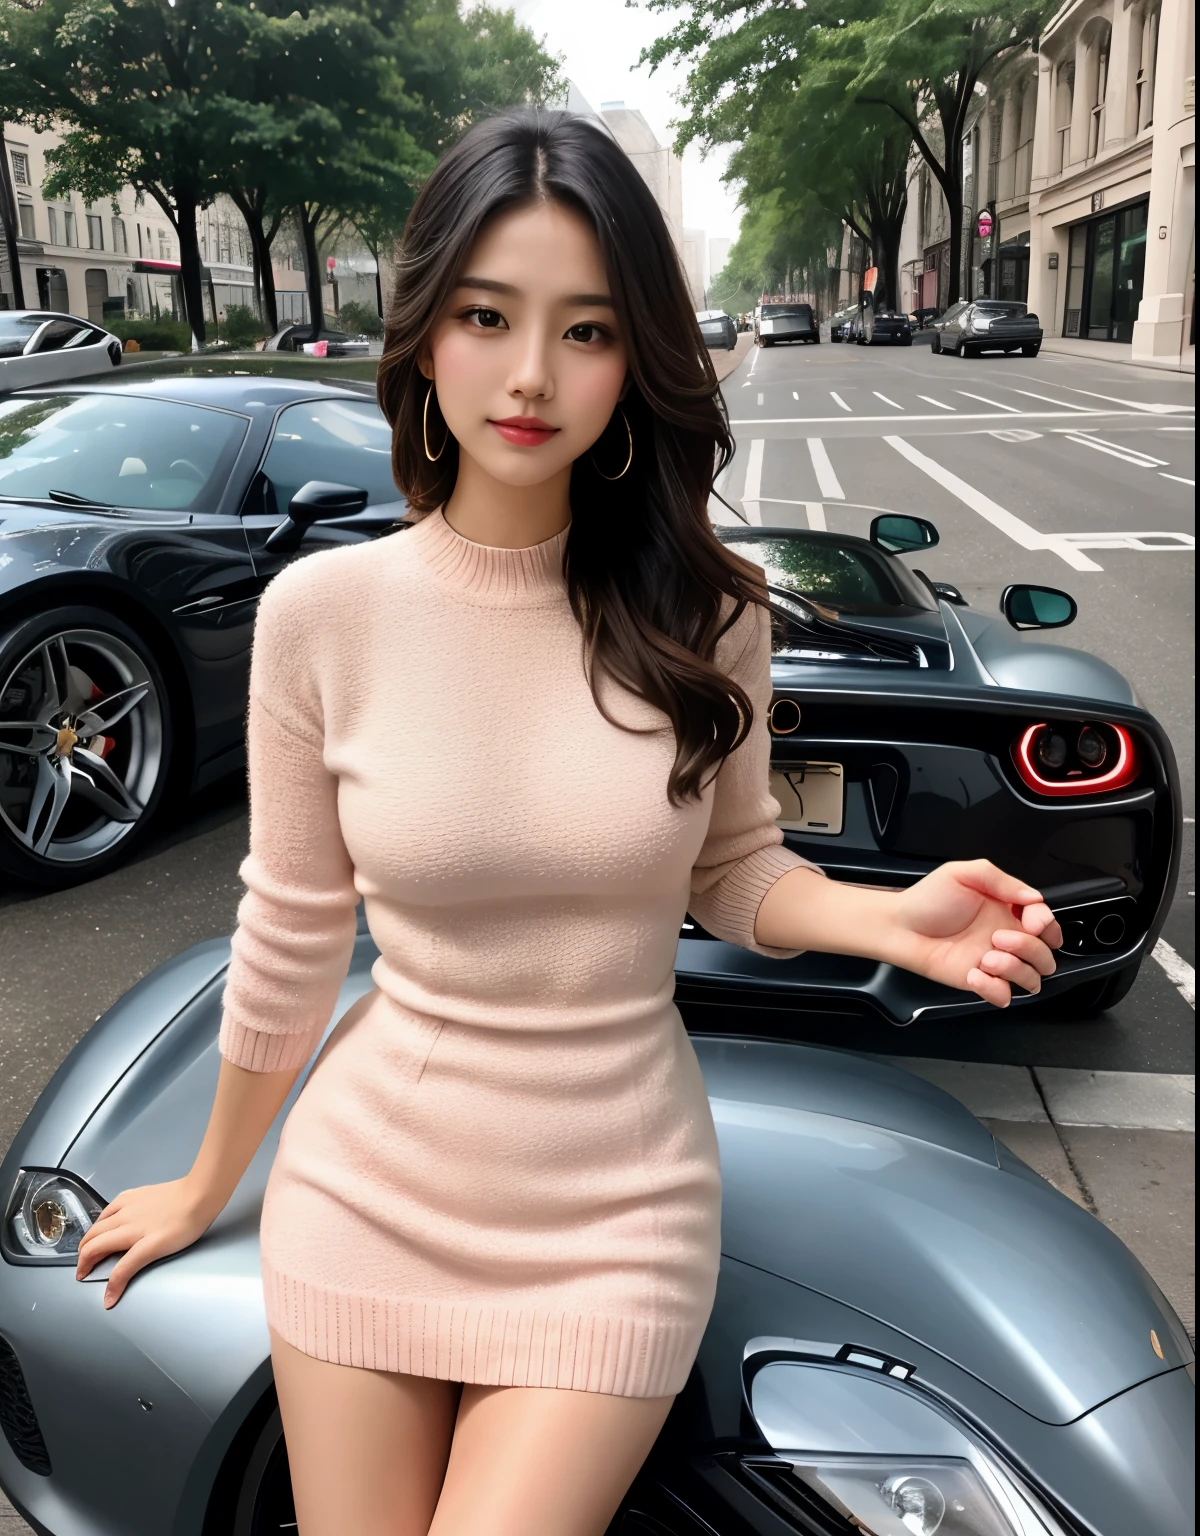 Imagine the highest quality photos。The background is a sophisticated cityscape、Luxury sports cars are shining bright lights。Beautiful long-haired female model in tight knitted dress posing in front of sports car。

Her knitted dress is an elegant pink color、Fit the body、Highlight beautiful curves。The material of the dress has a sense of luxury、Glossy。Her long hair was soft and wavy.、It sways in the wind to create an elegant atmosphere。

Female model looking at camera with confident expression.、The poses are attractive with a sophisticated posture。Fusion of beauty figures and sports cars、It further emphasizes the feeling of luxury and attraction。

Photos that capture lovely moments that convey the charm of luxury and fashion。.、It will make your viewers feel a gorgeous world。Elegant pose of model and glamorous sight of sports car、It is a photo that exudes an attractive sense of luxury...。